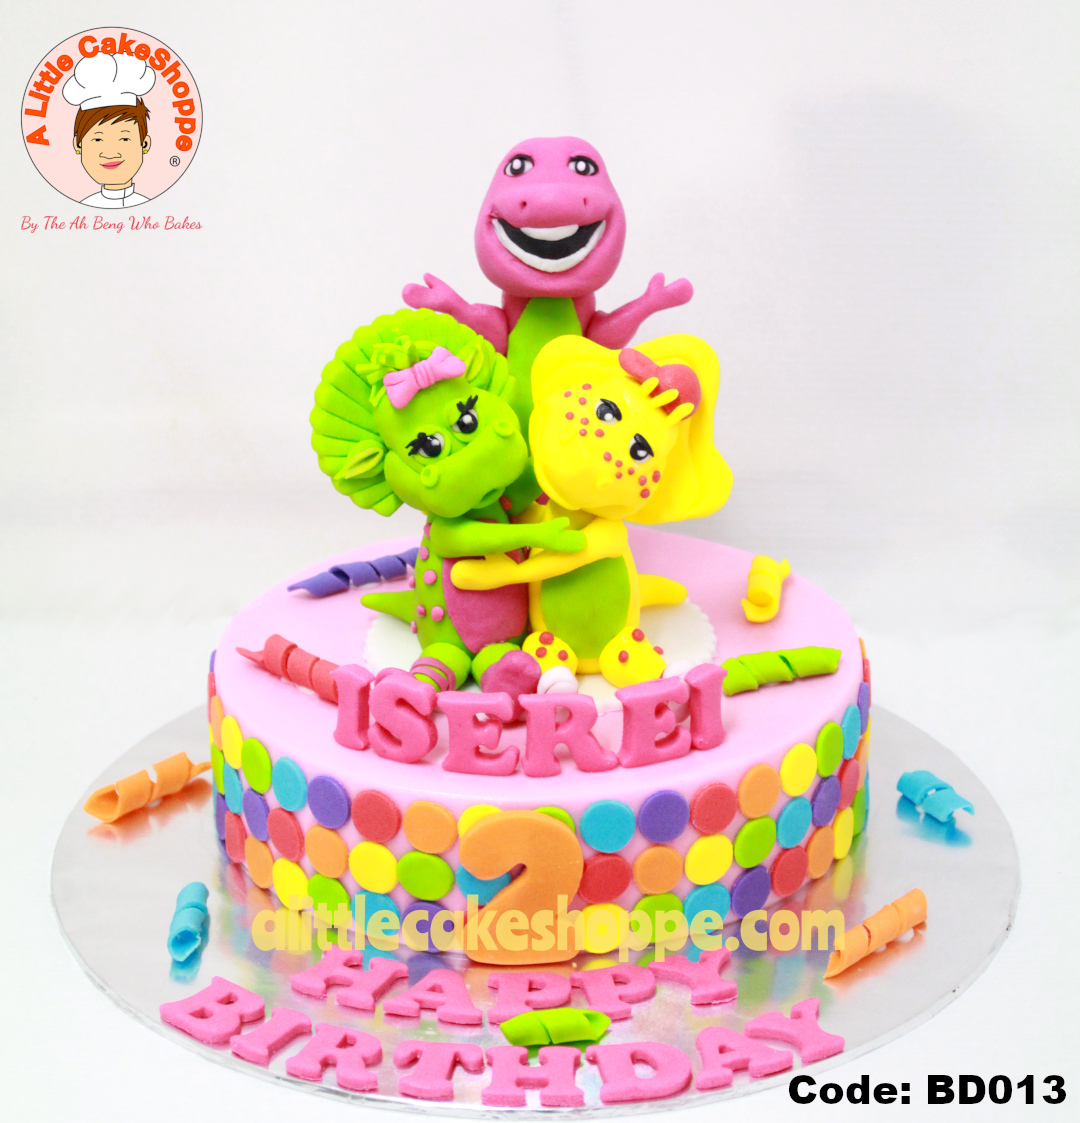 Best Cake Shop Singapore Delivery Best Customised Cake Shop Singapore customise cake custom cake 2D 3D birthday cake cupcakes desserts wedding corporate events anniversary 1st birthday 21st birthday fondant fresh cream buttercream cakes alittlecakeshoppe a little cake shoppe compliments review singapore bakers SG cake shop cakeshop ah beng who bakes sgbakes novelty cakes sgcakes licensed sfa nea cake delivery celebration cakes kids birthday cake surprise cake adult children barney